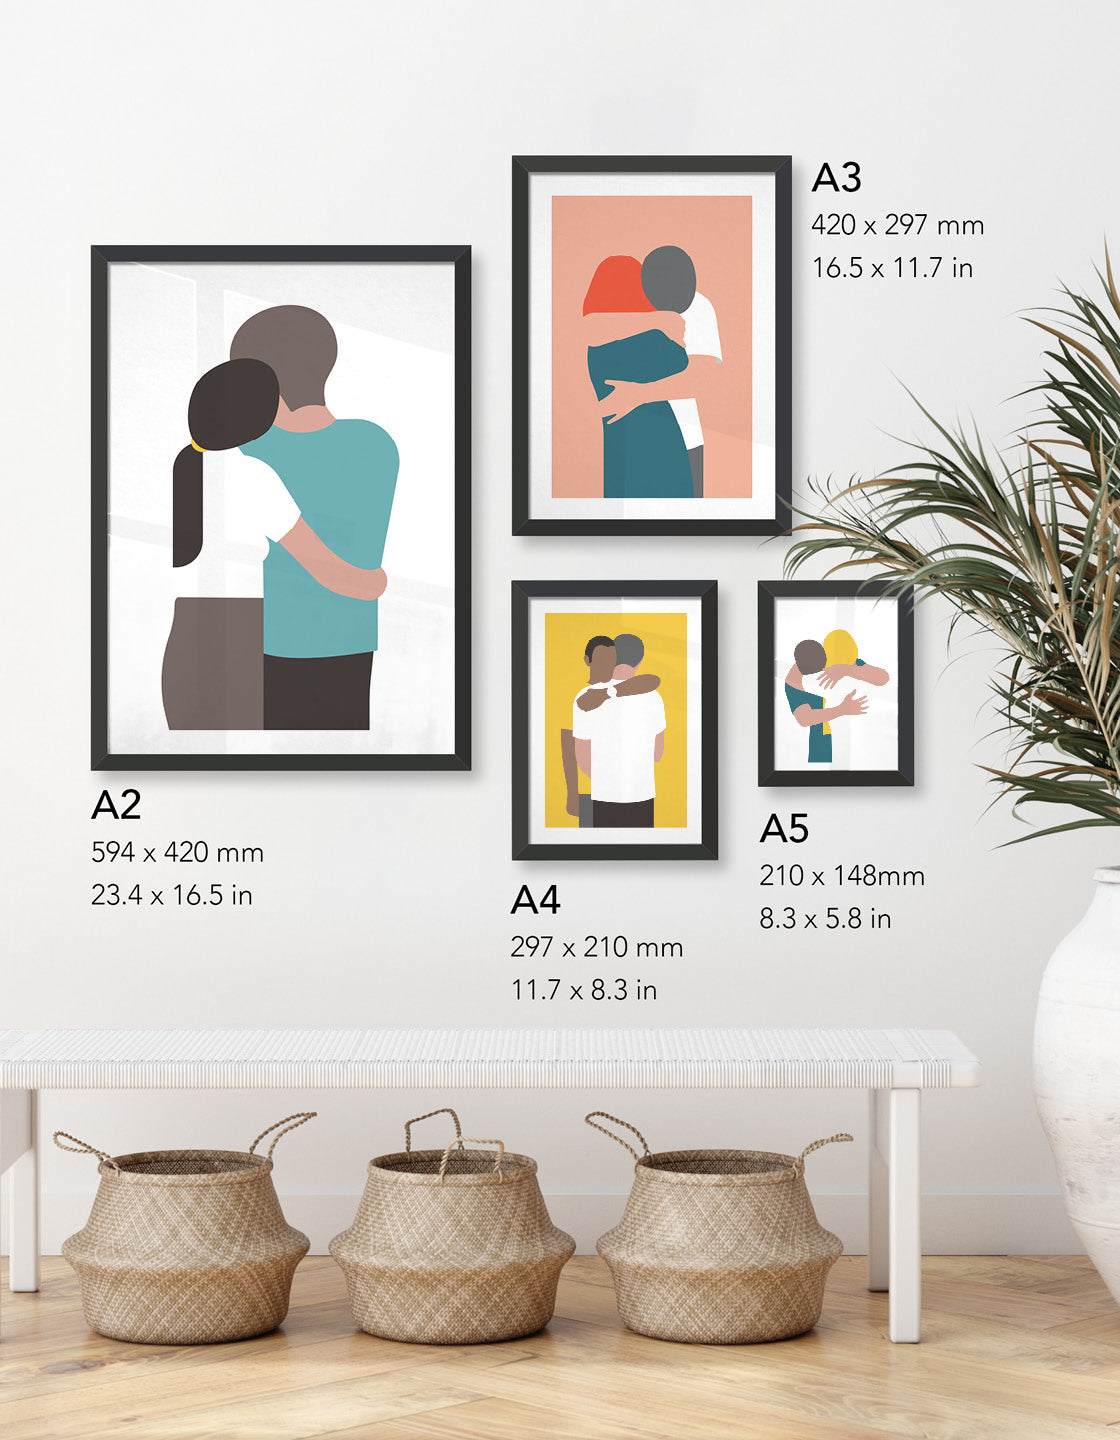 Image shows the different sizes of prints available as well as the variety of love designs in store